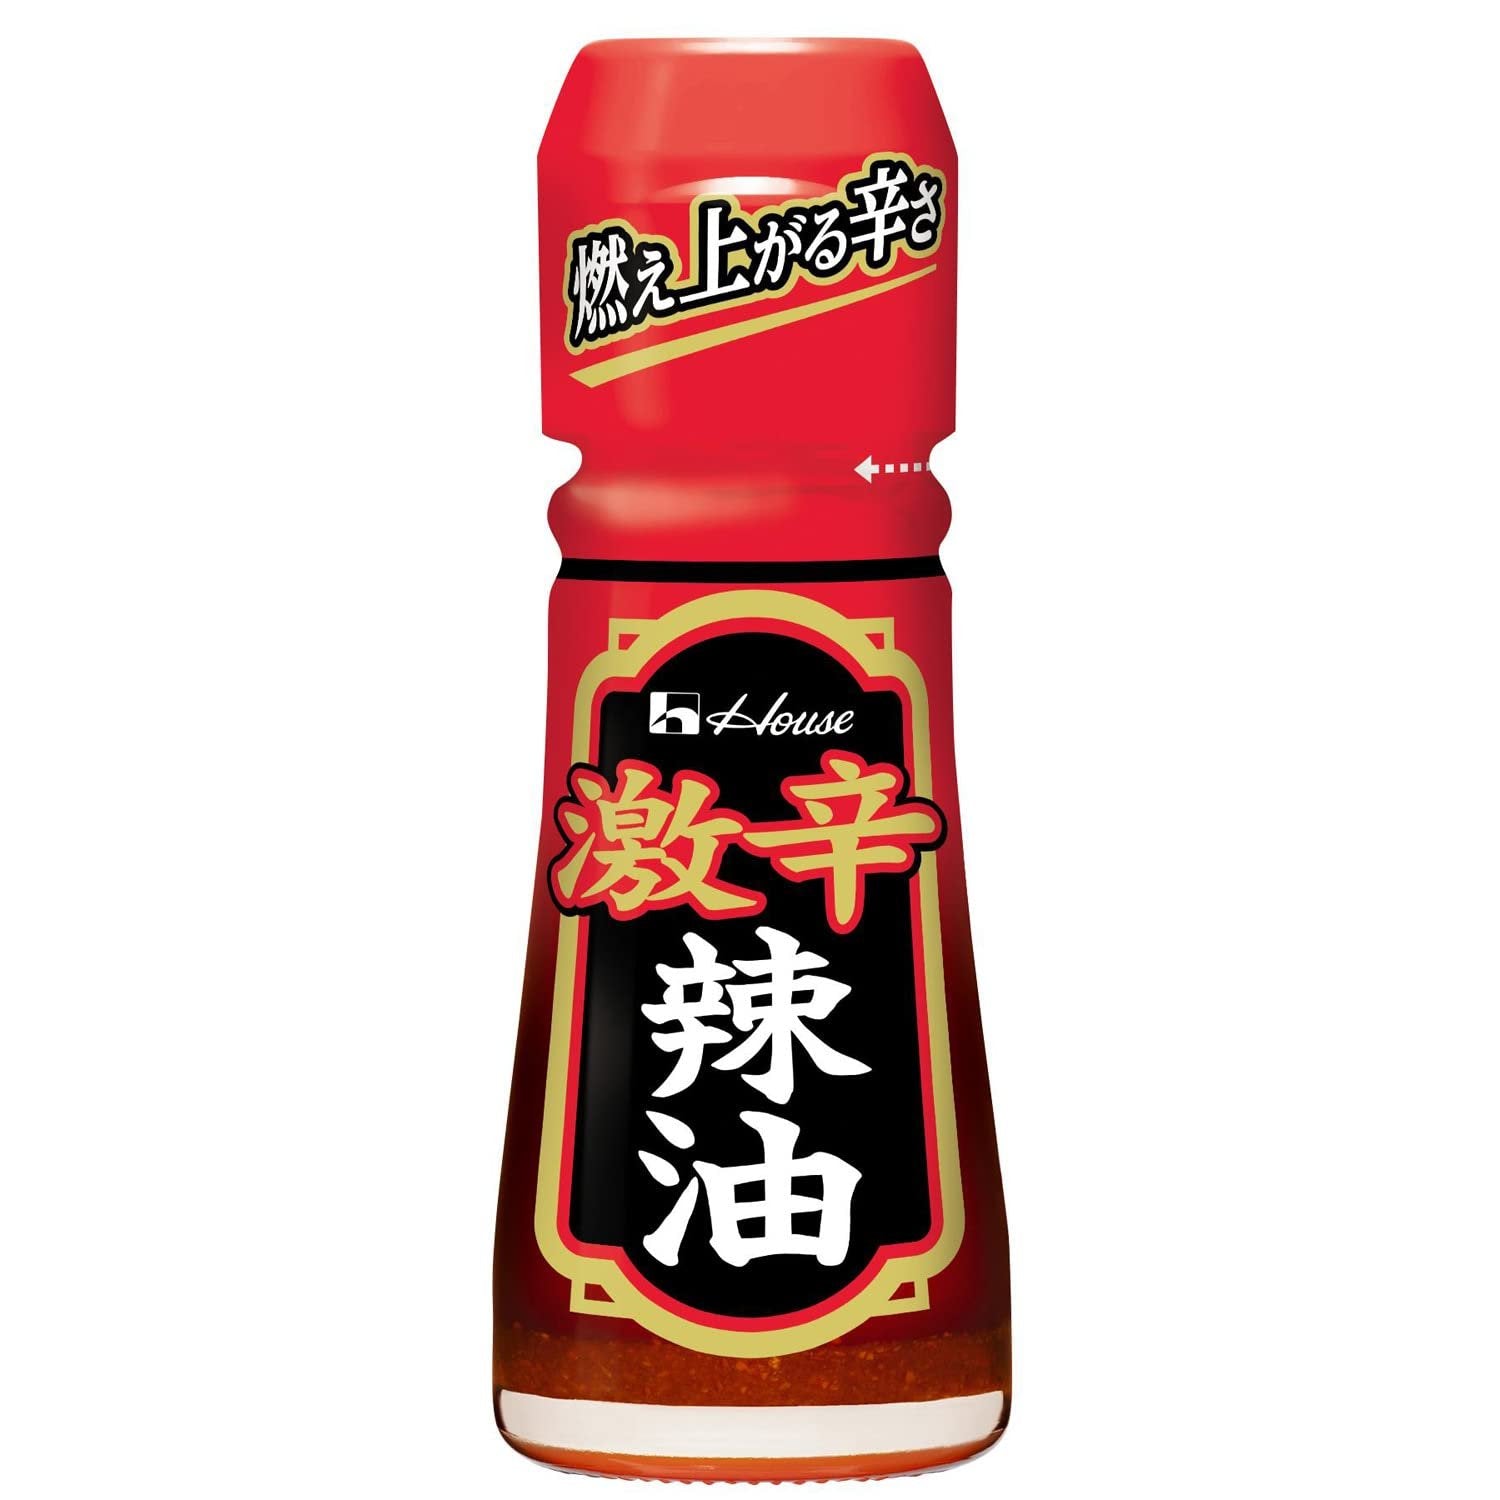 House Extra Hot Rayu Spicy Chili Sesame Oil Sauce 31g